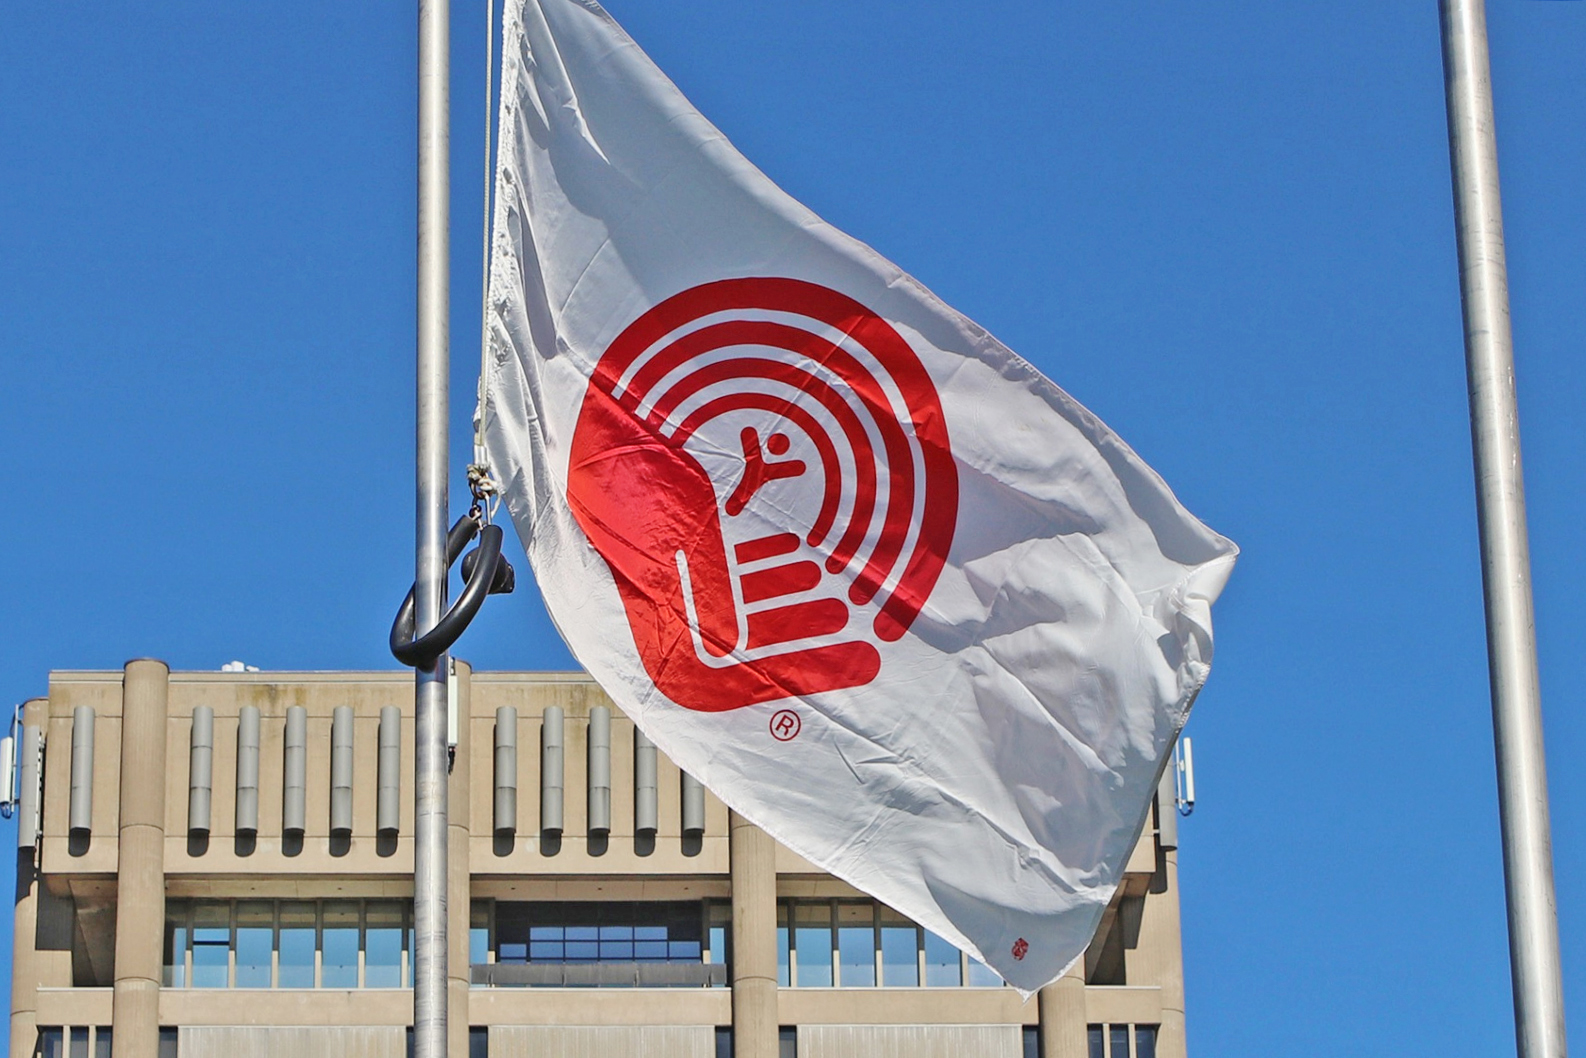 The United Way flag flies in front of 全球电竞直播 ’s Schmon Tower. The flag is white with the red United Way logo, which looks like a hand holding a stick figure while a rainbow arches over the figure. Only the top of the Schmon Tower building is visible in the background. A clear blue sky takes up the rest of the frame.